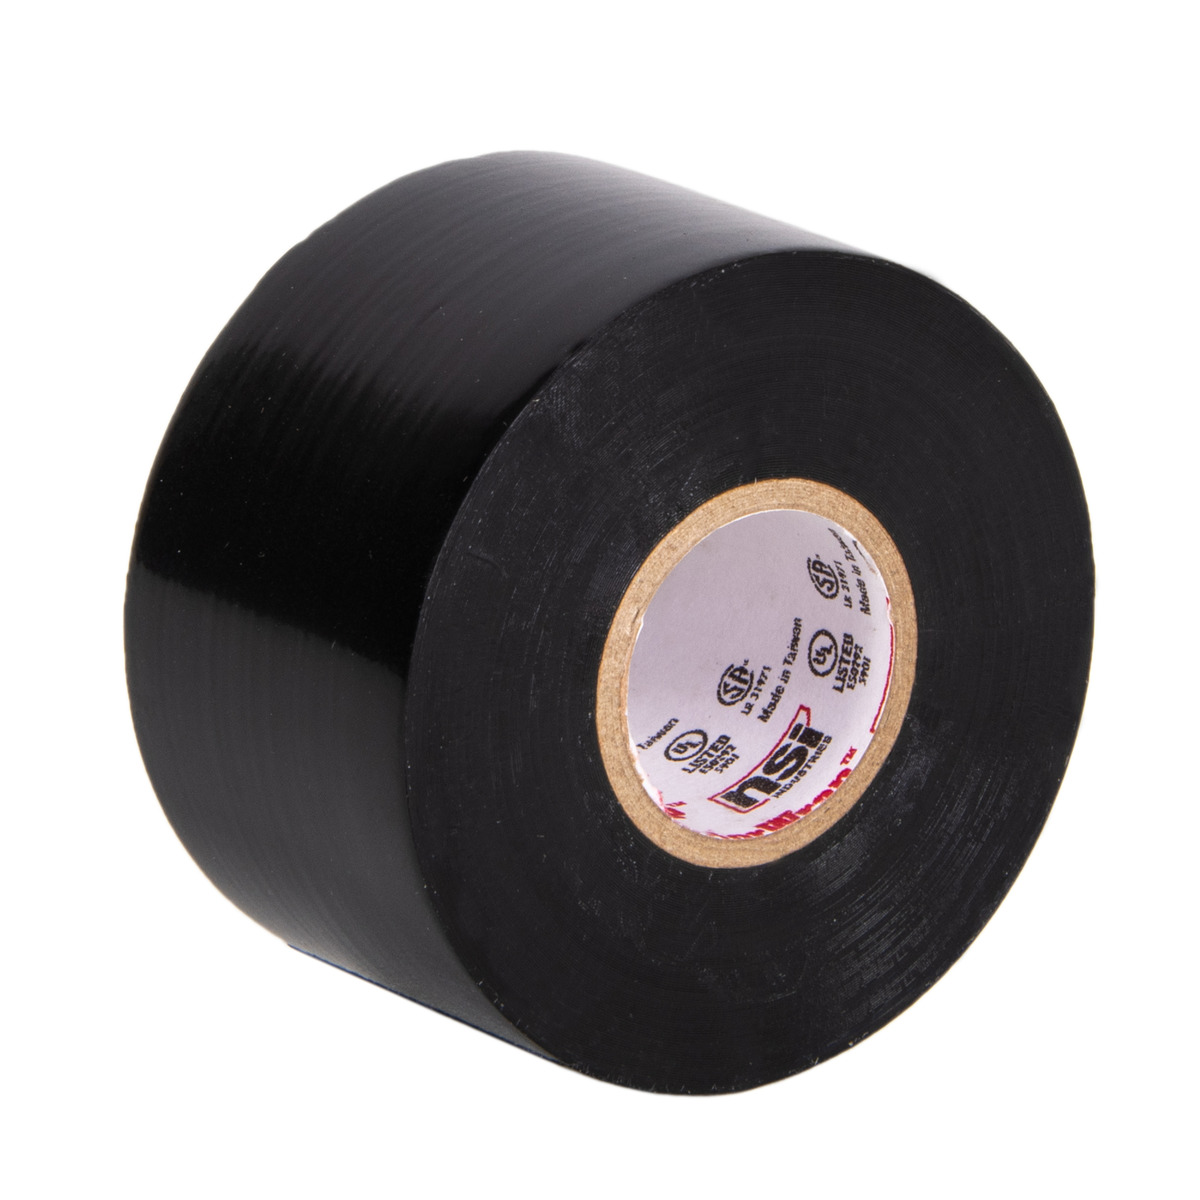 Electrical Tape: 1 Wide, 792 Long, 7 mil Thick, Black